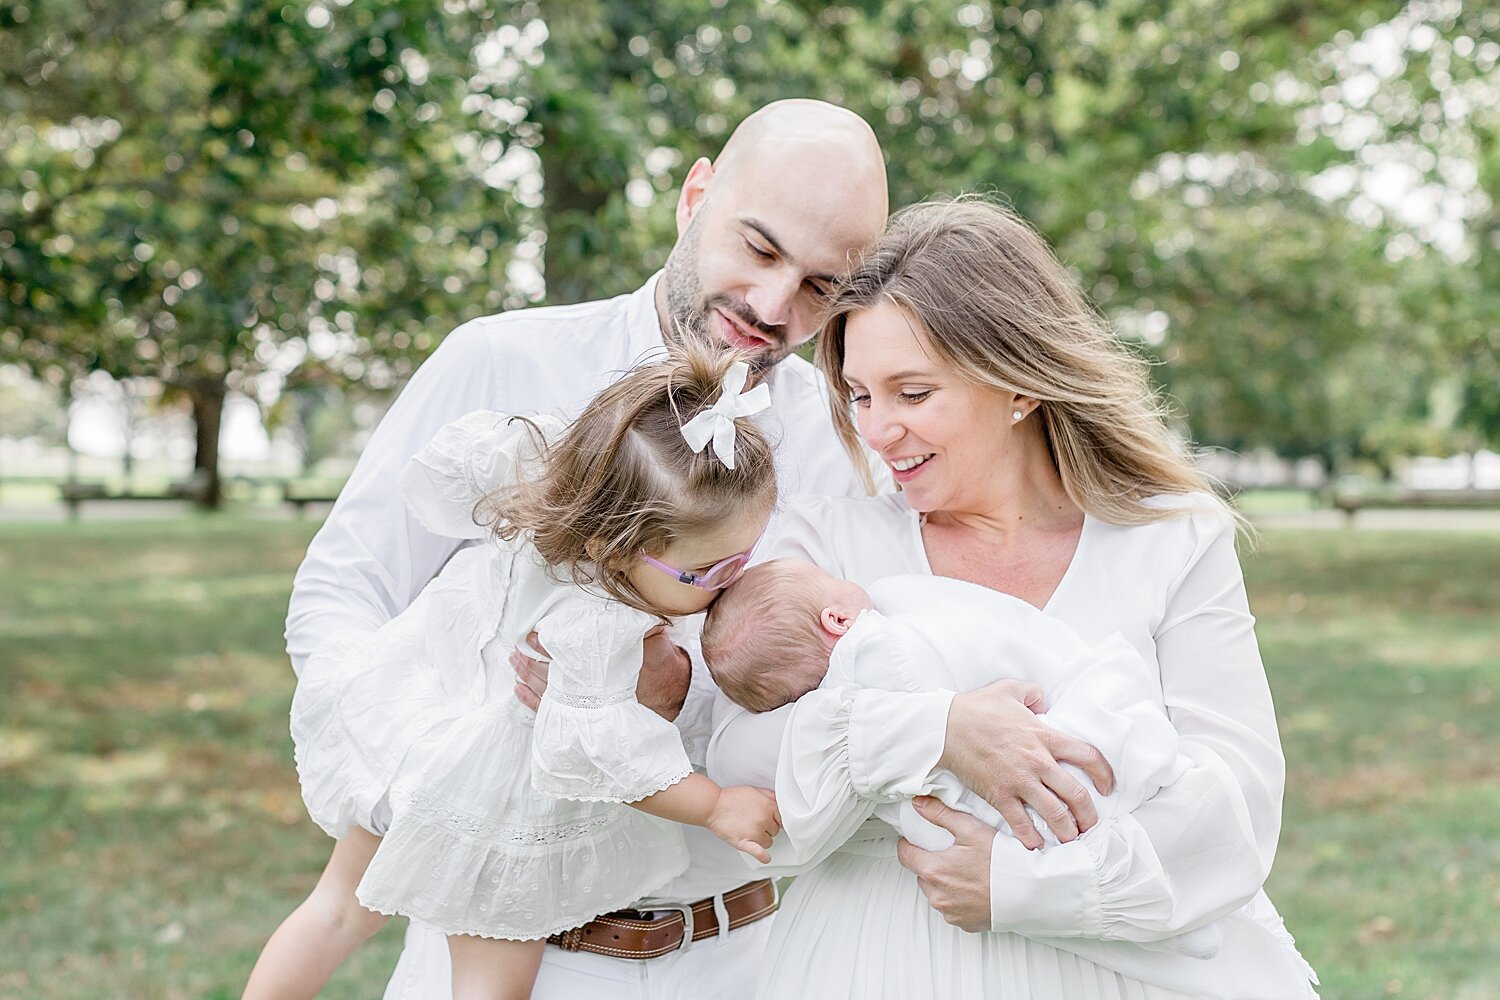 Newborn photography at Sherwood Island in Westport, Connecticut with Kristin Wood Photography.